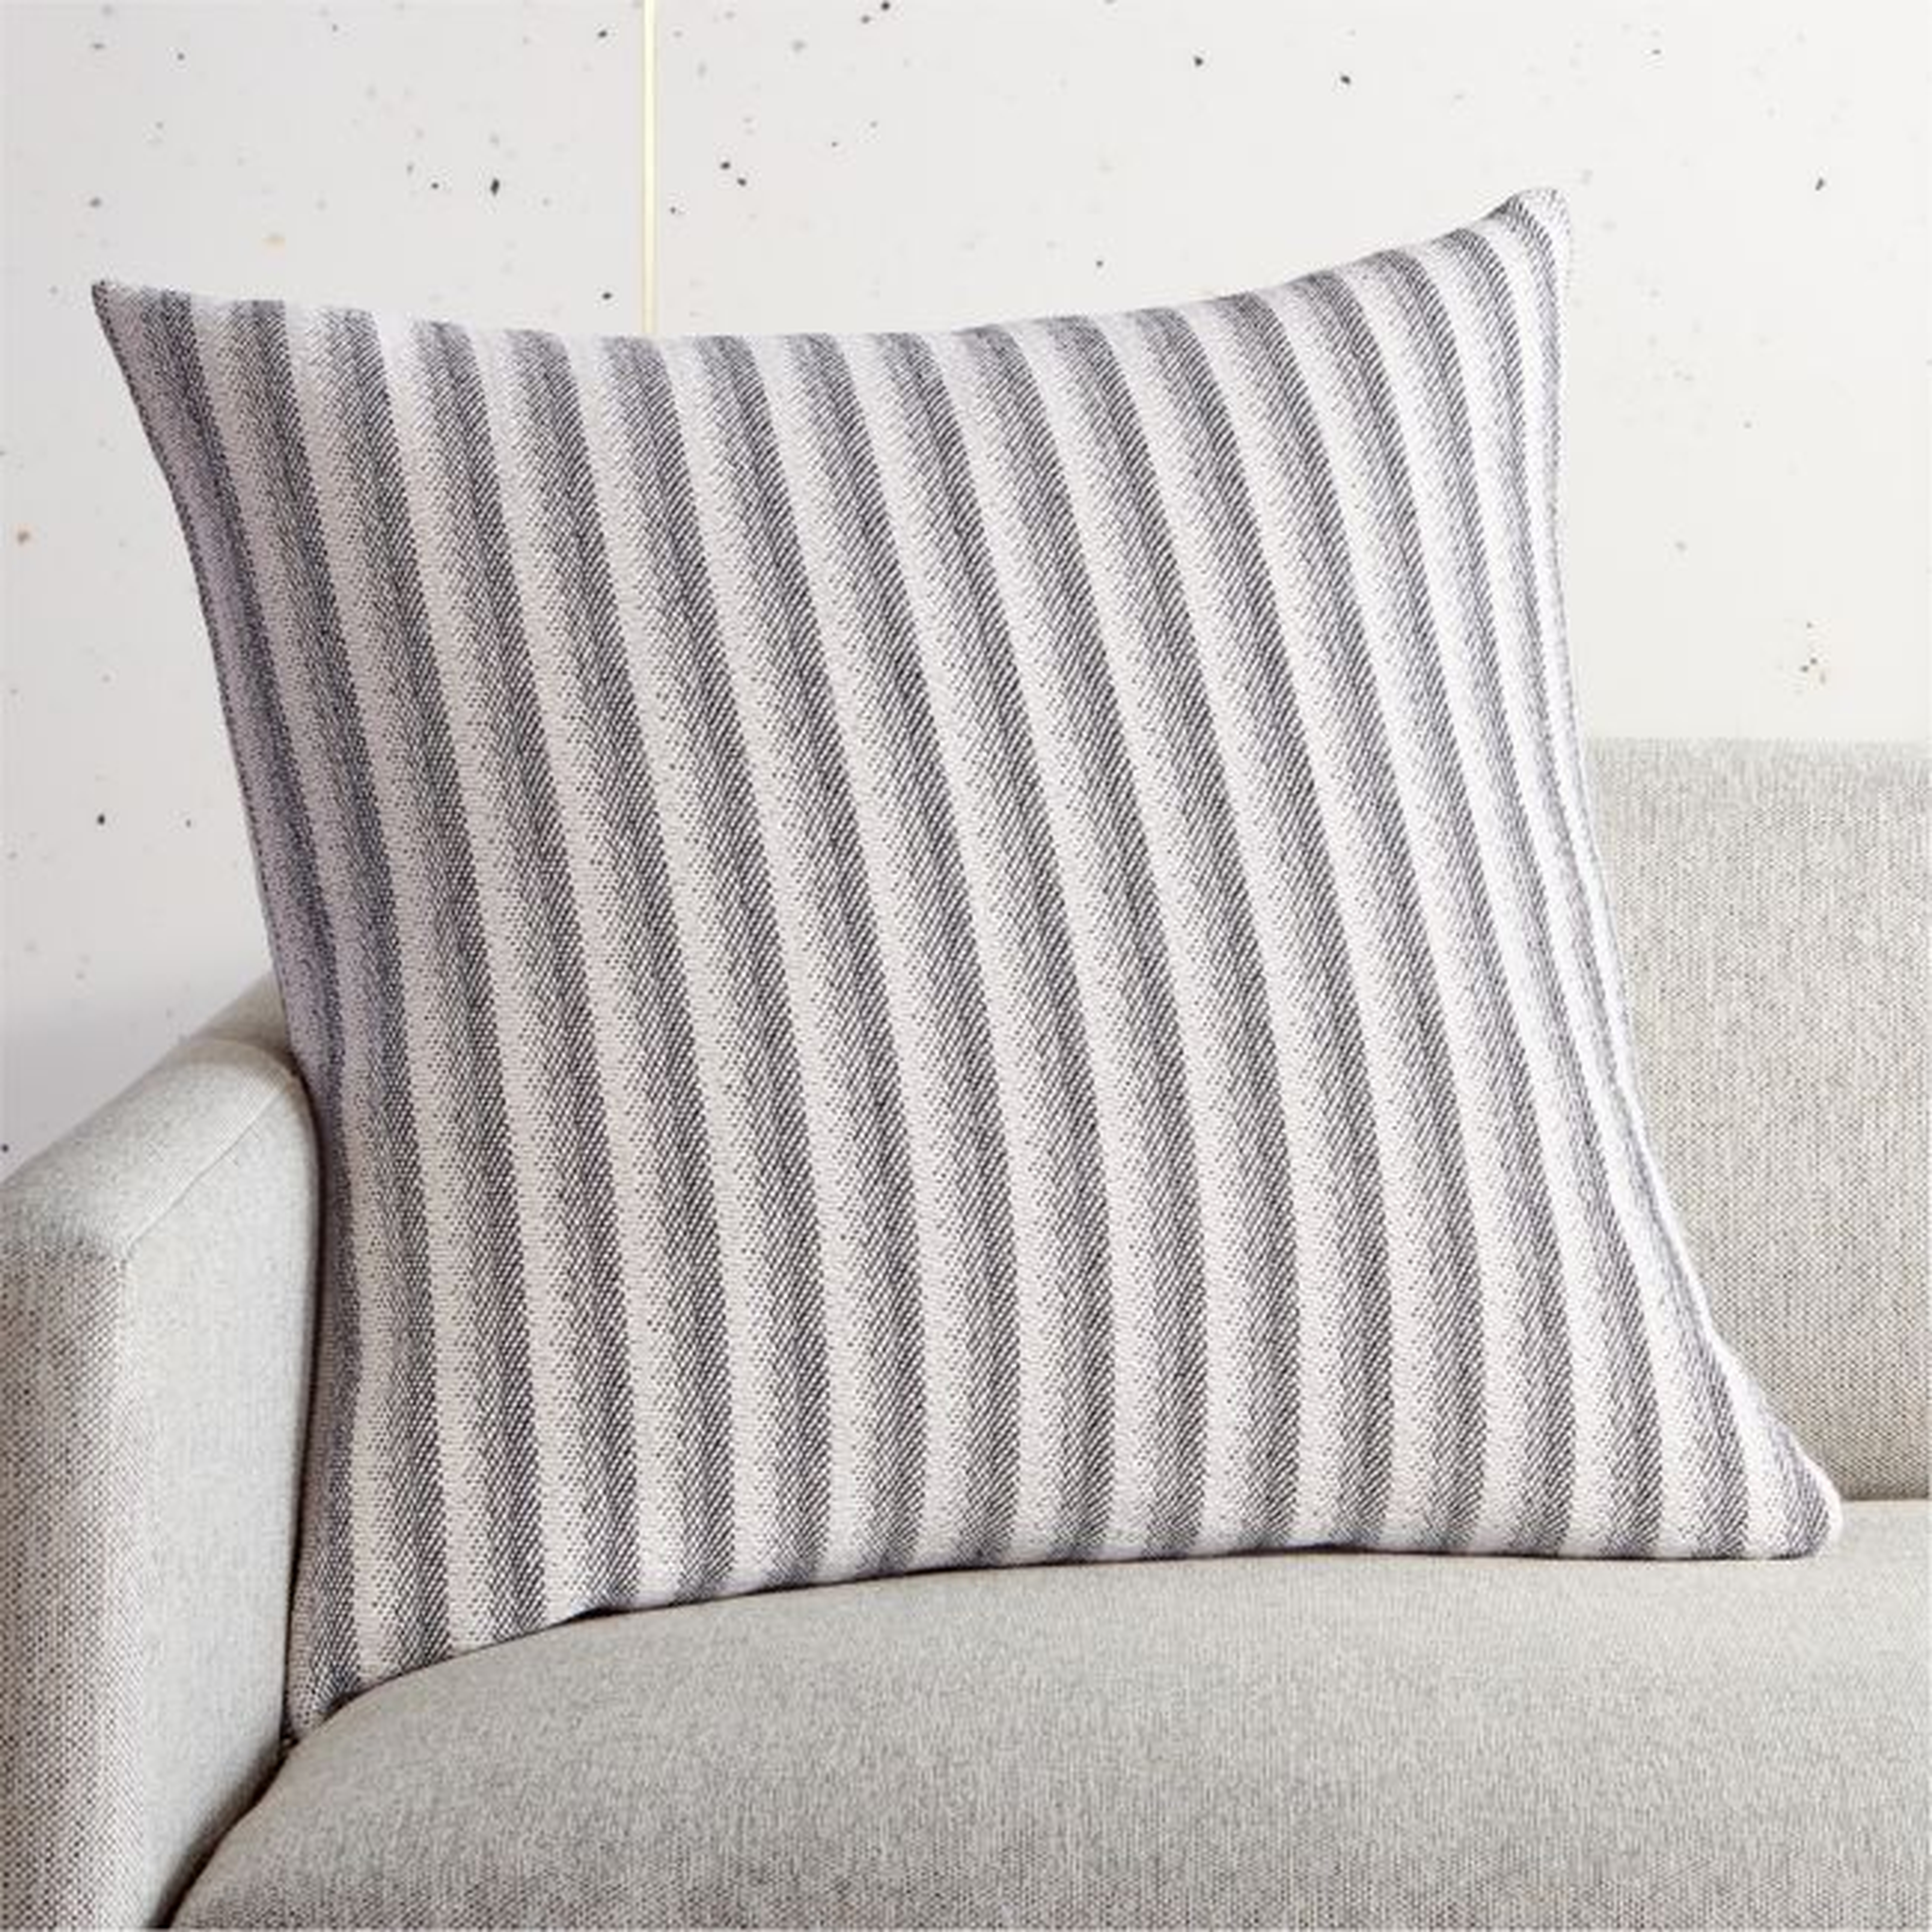 23" Rhone Stripe Pillow with Feather-Down Insert - CB2